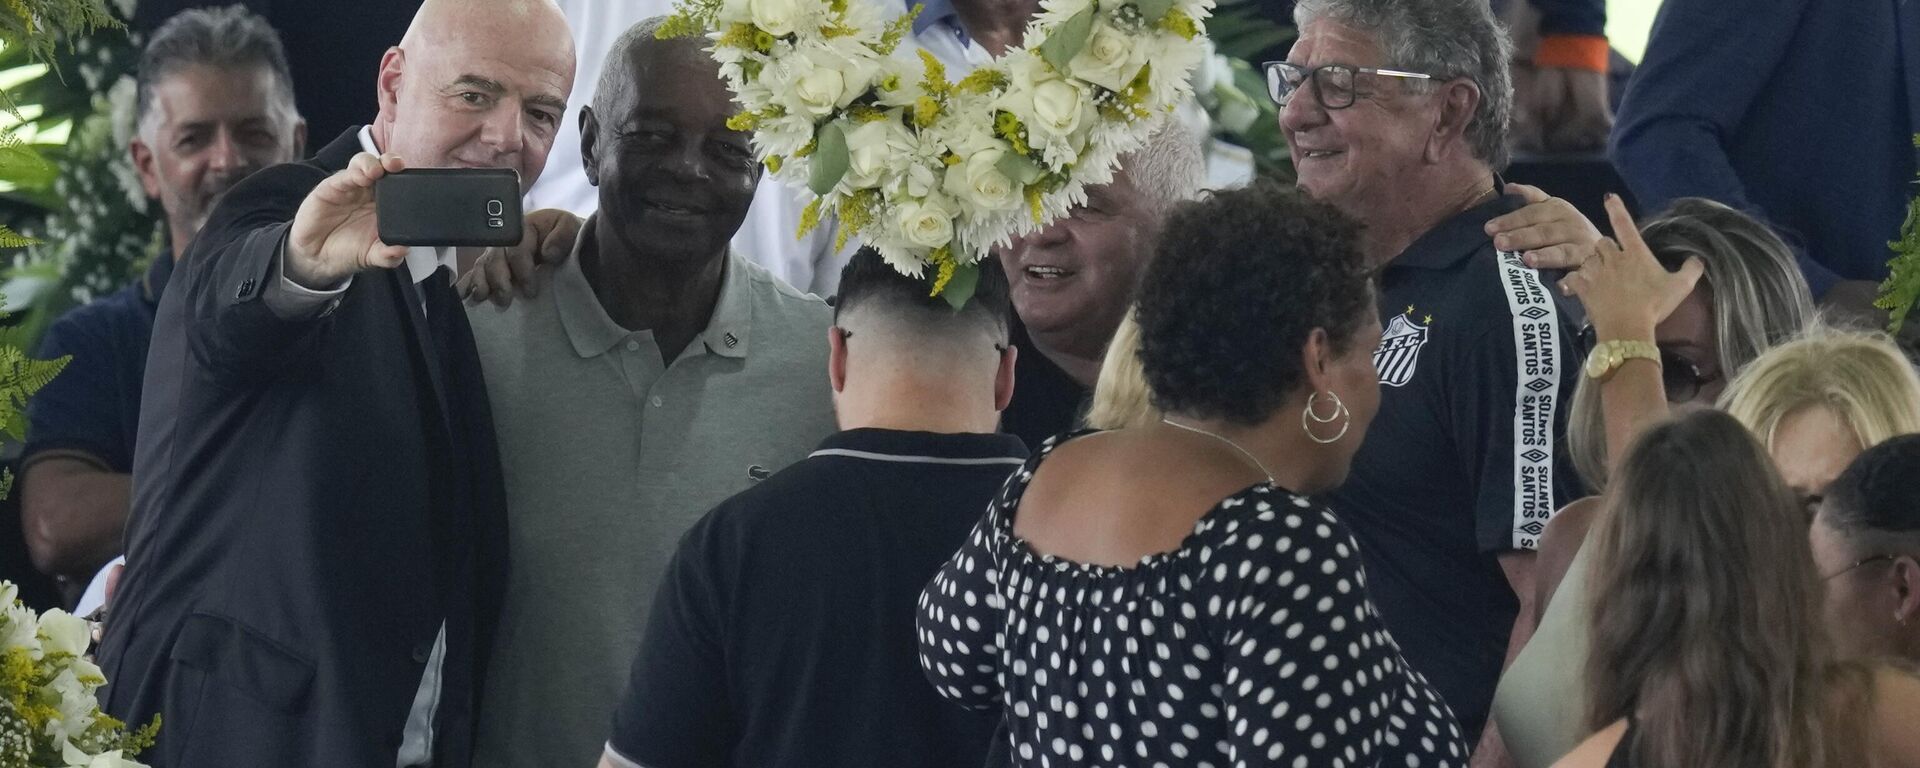 FIFA President Gianni Infantino takes a selfie with Lima, a former Santos soccer player, during the wake of the late Brazilian soccer great Pele in Santos, Brazil, Monday, Jan. 2, 2023.  - Sputnik International, 1920, 04.01.2023